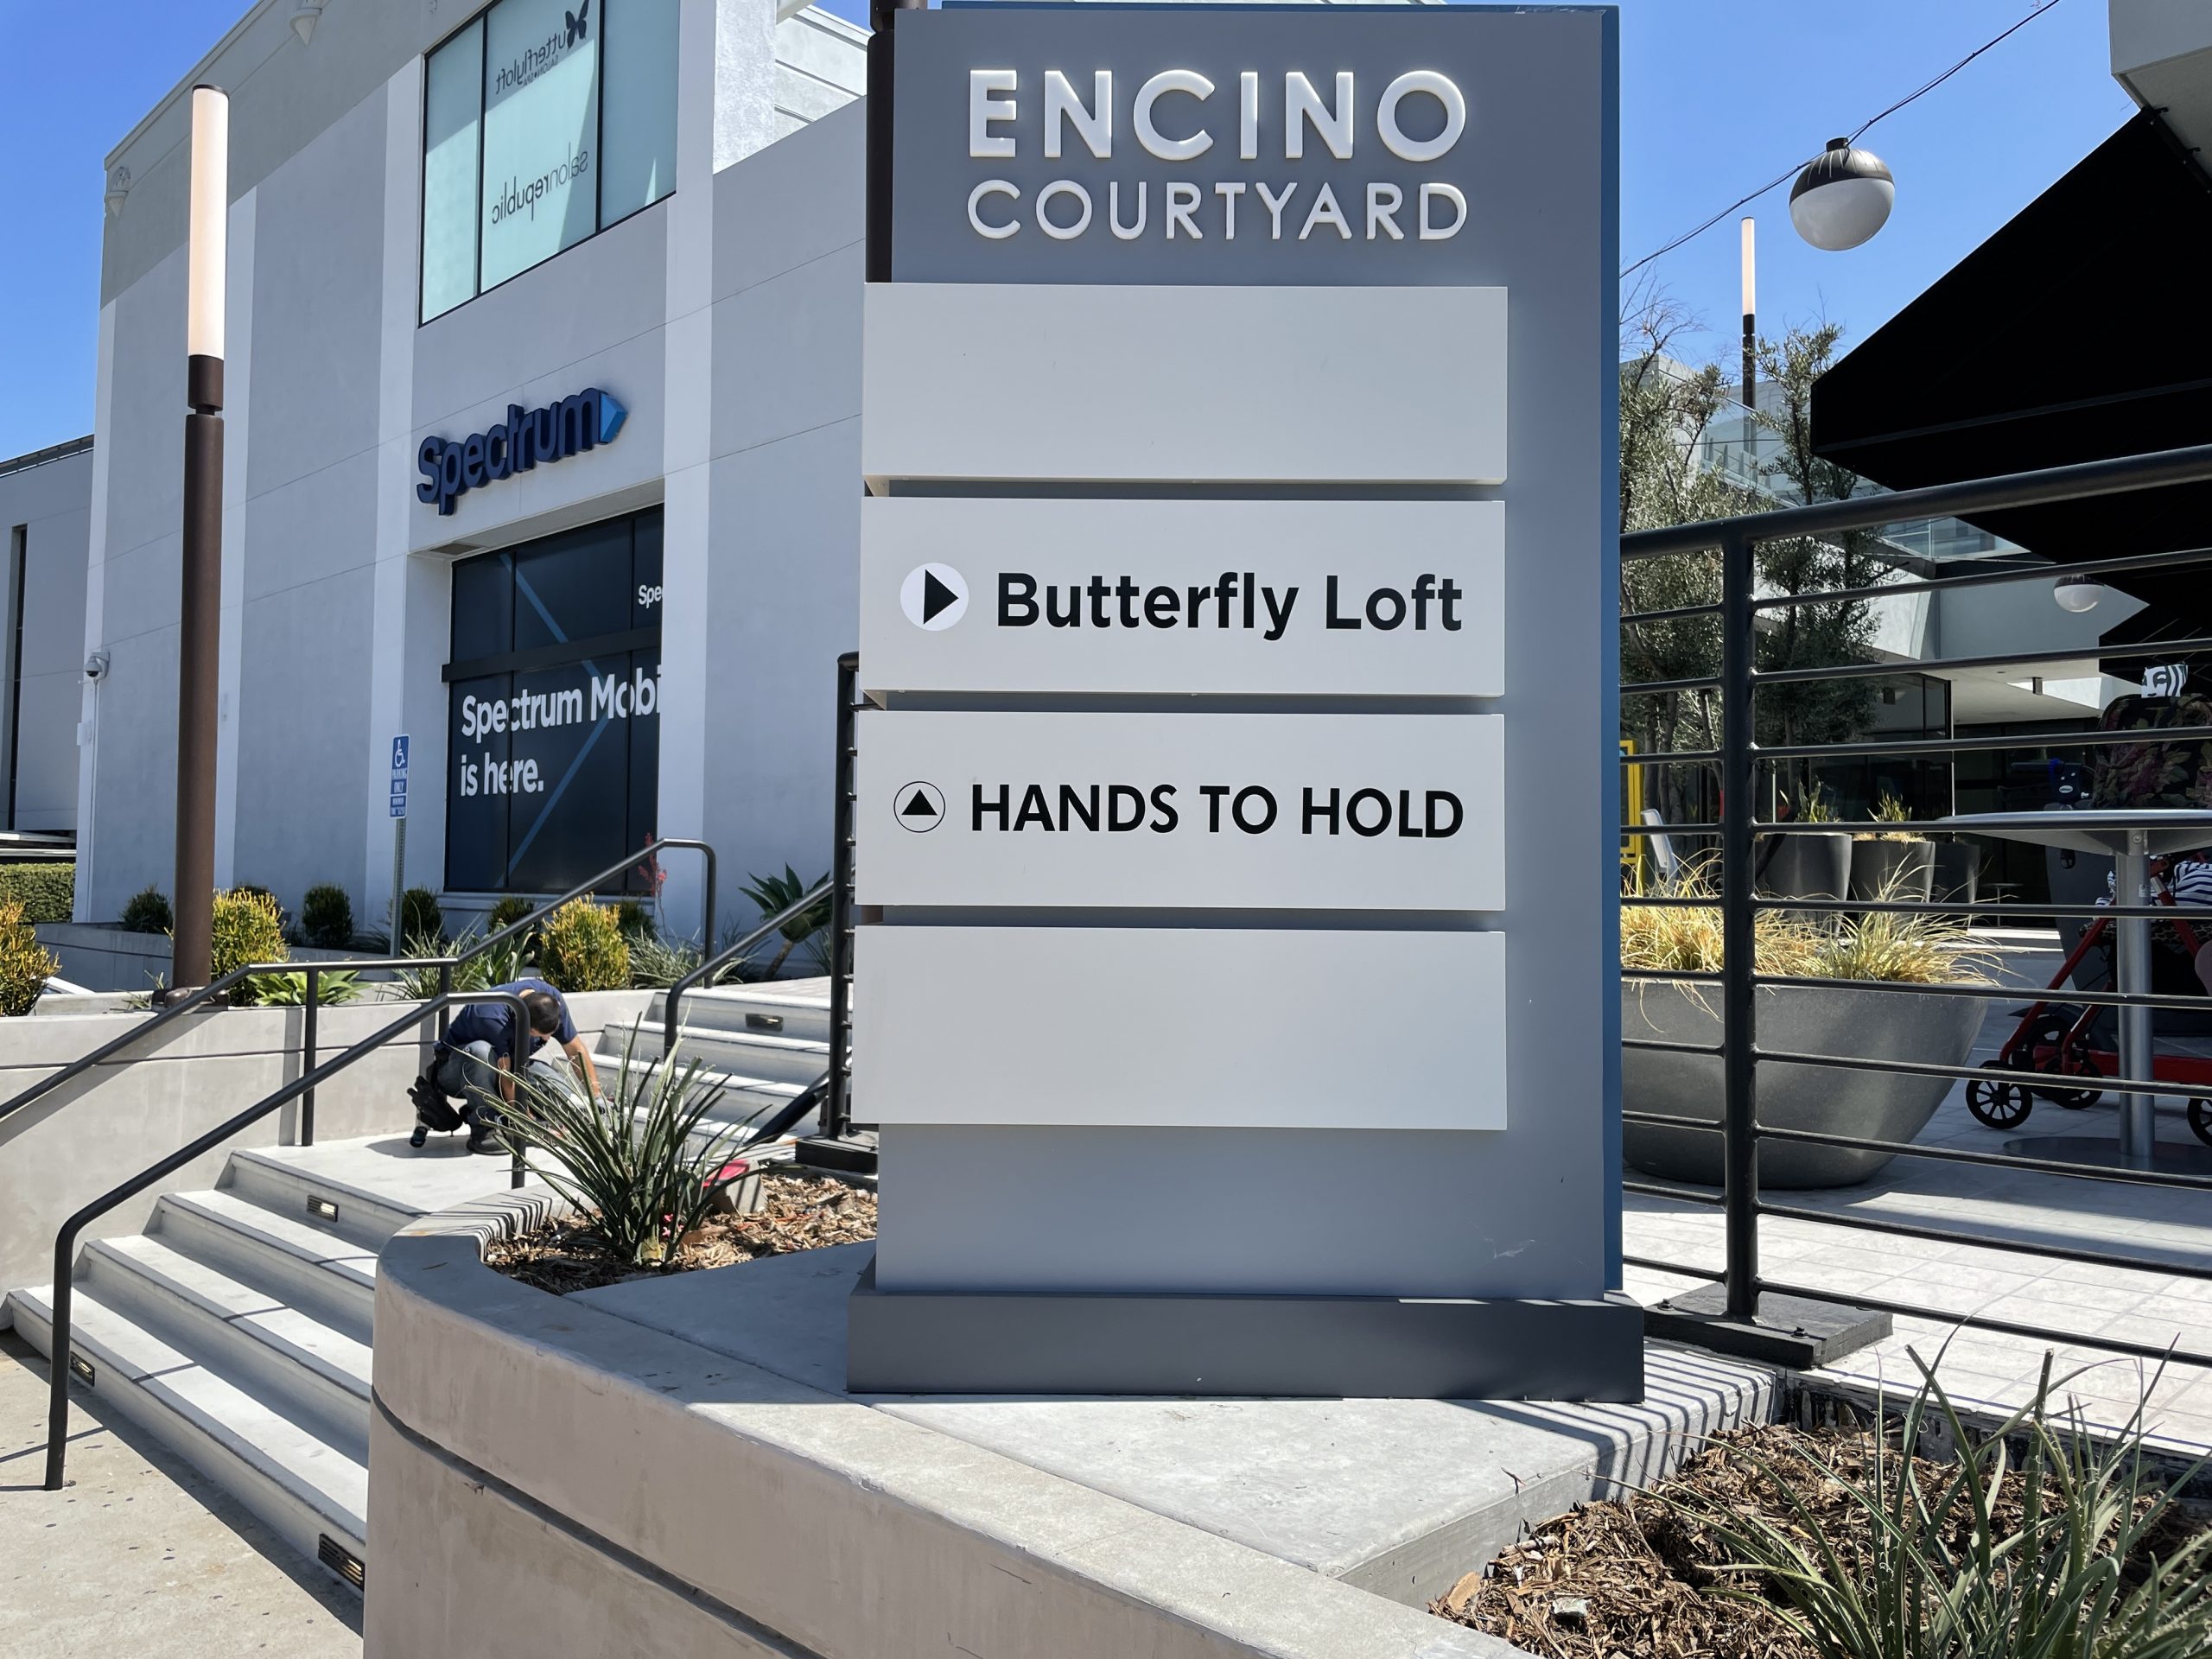 Businesses in commercial spaces can use outdoor wayfinding signs to guide customers. Like these signs for Hands to Hold's Encino Courtyard branch.